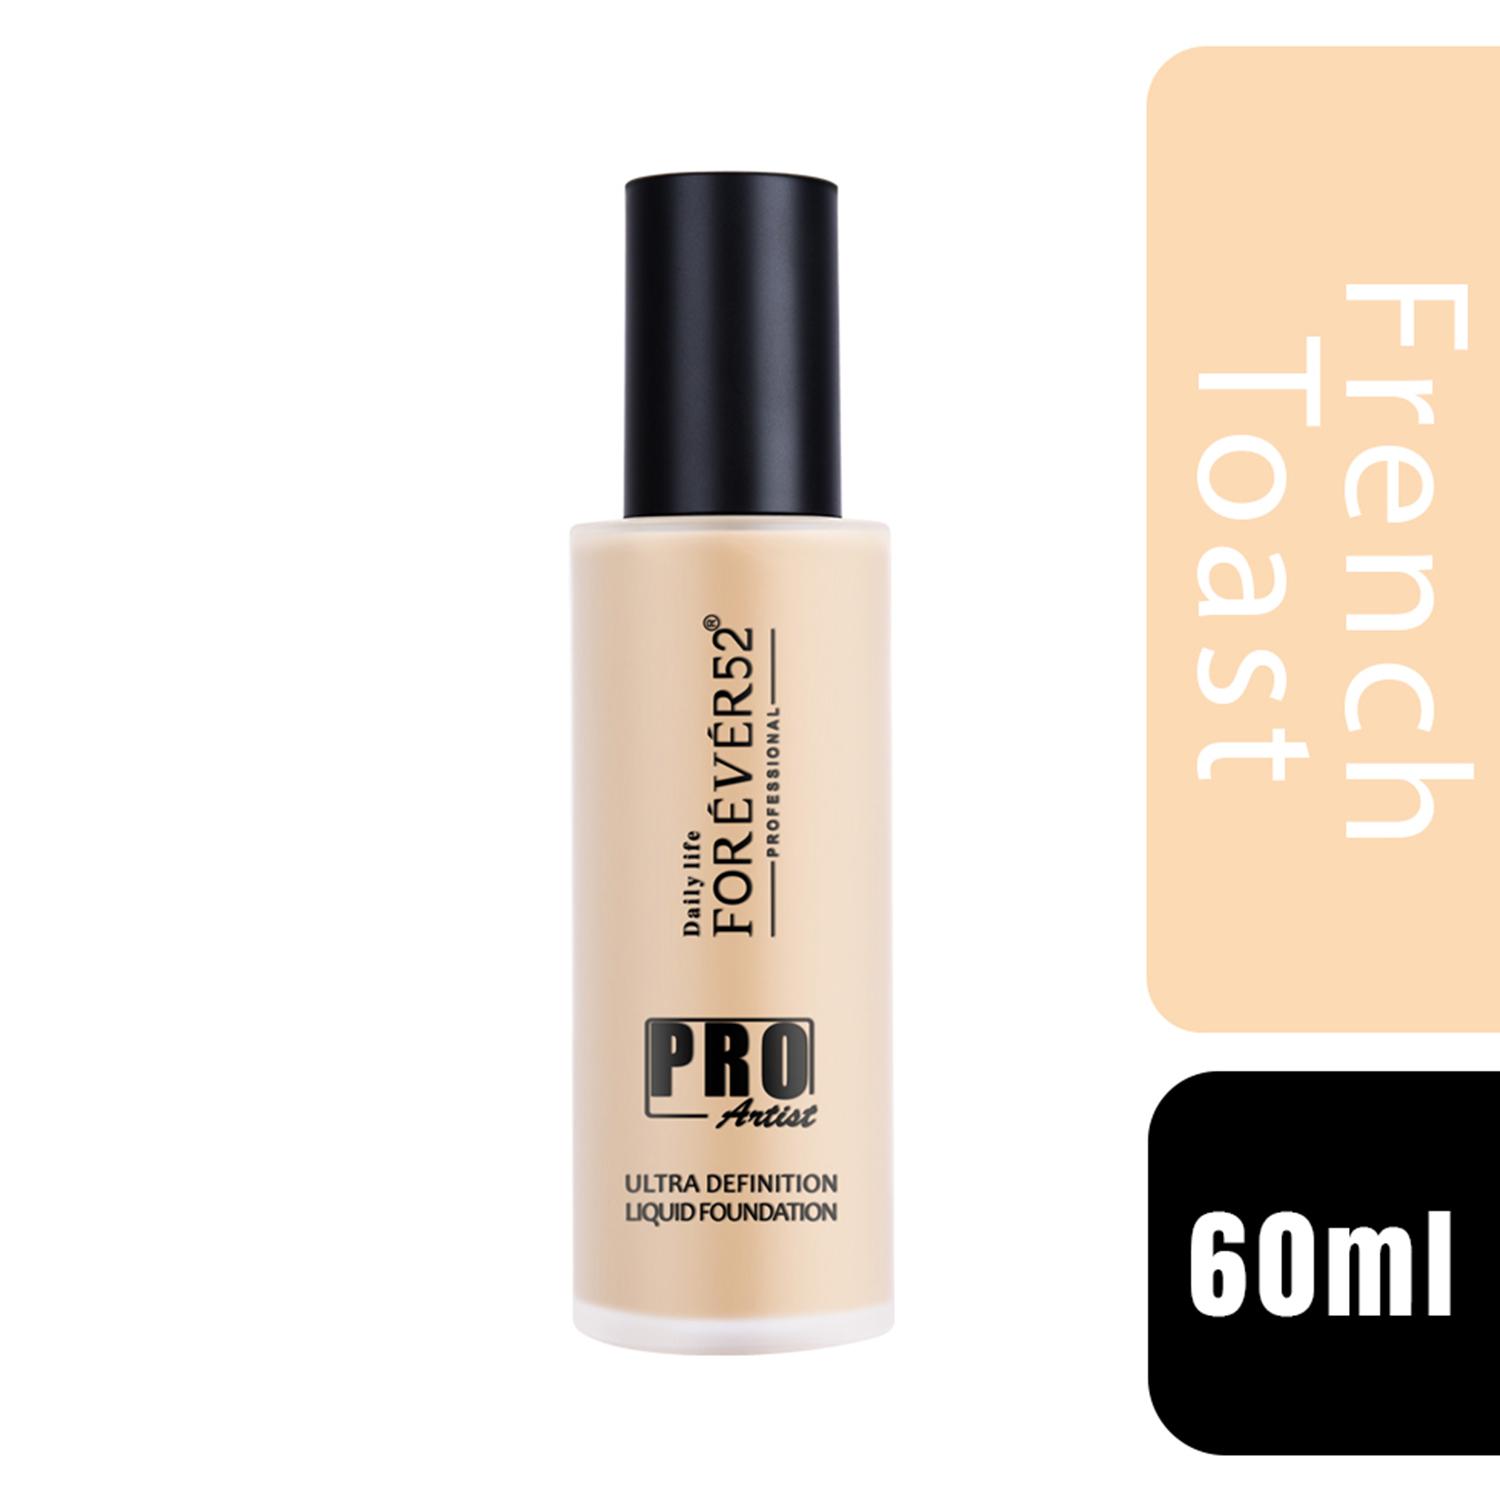 Daily Life Forever52 | Daily Life Forever52 Pro Artist Ultra Definition Liquid Foundation BUF004 - French Toast (60ml)